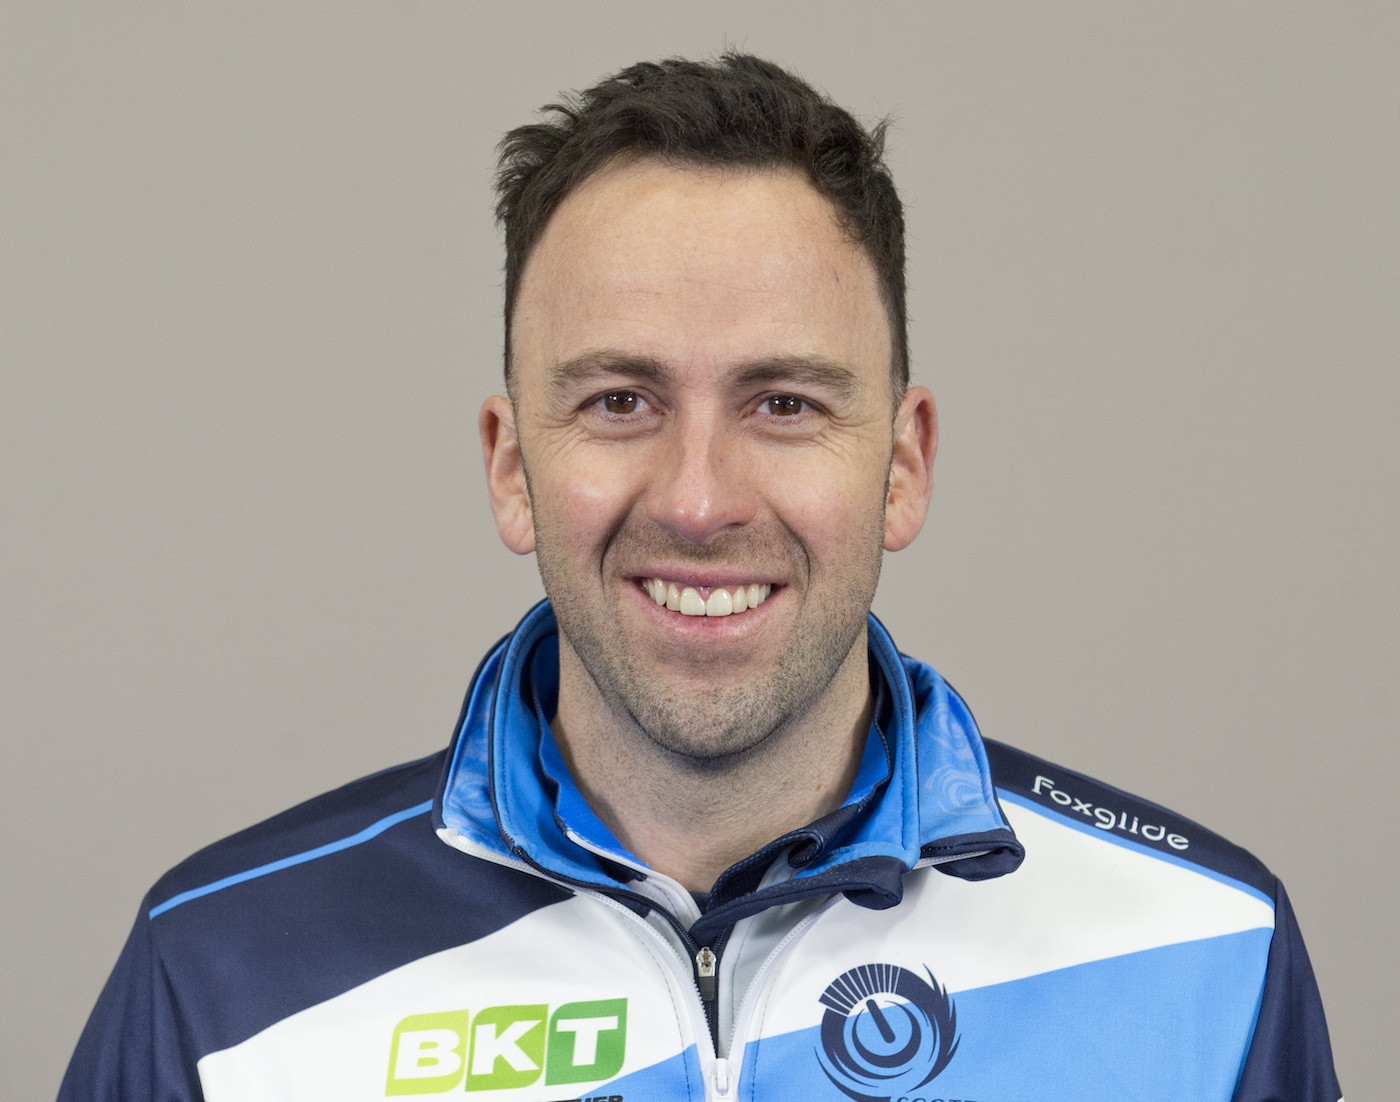 Scotland's David Murdoch, Britain’s two-time world champion and Olympic silver-medal-winning skip, is to take over as Canada's high performance director ©Curling Canada